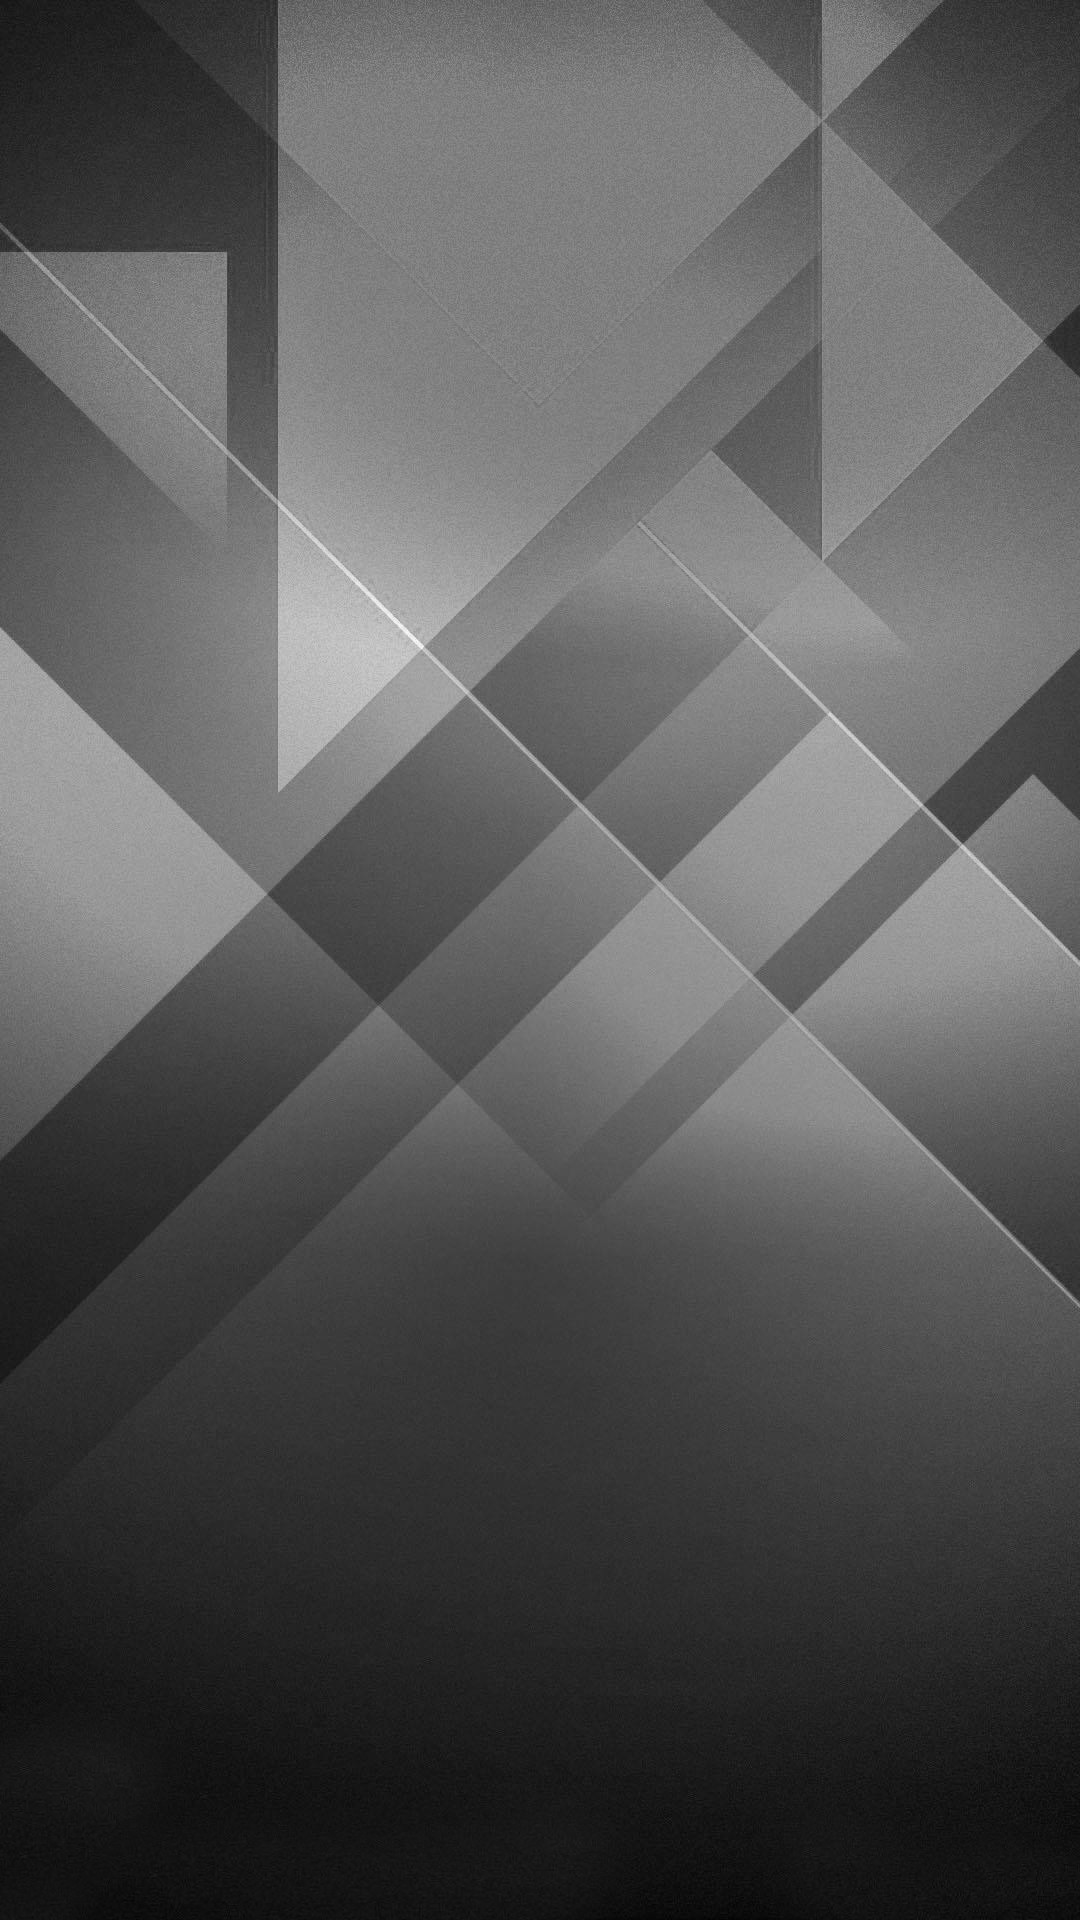 BLack and white Abstract wallpaper for mobile